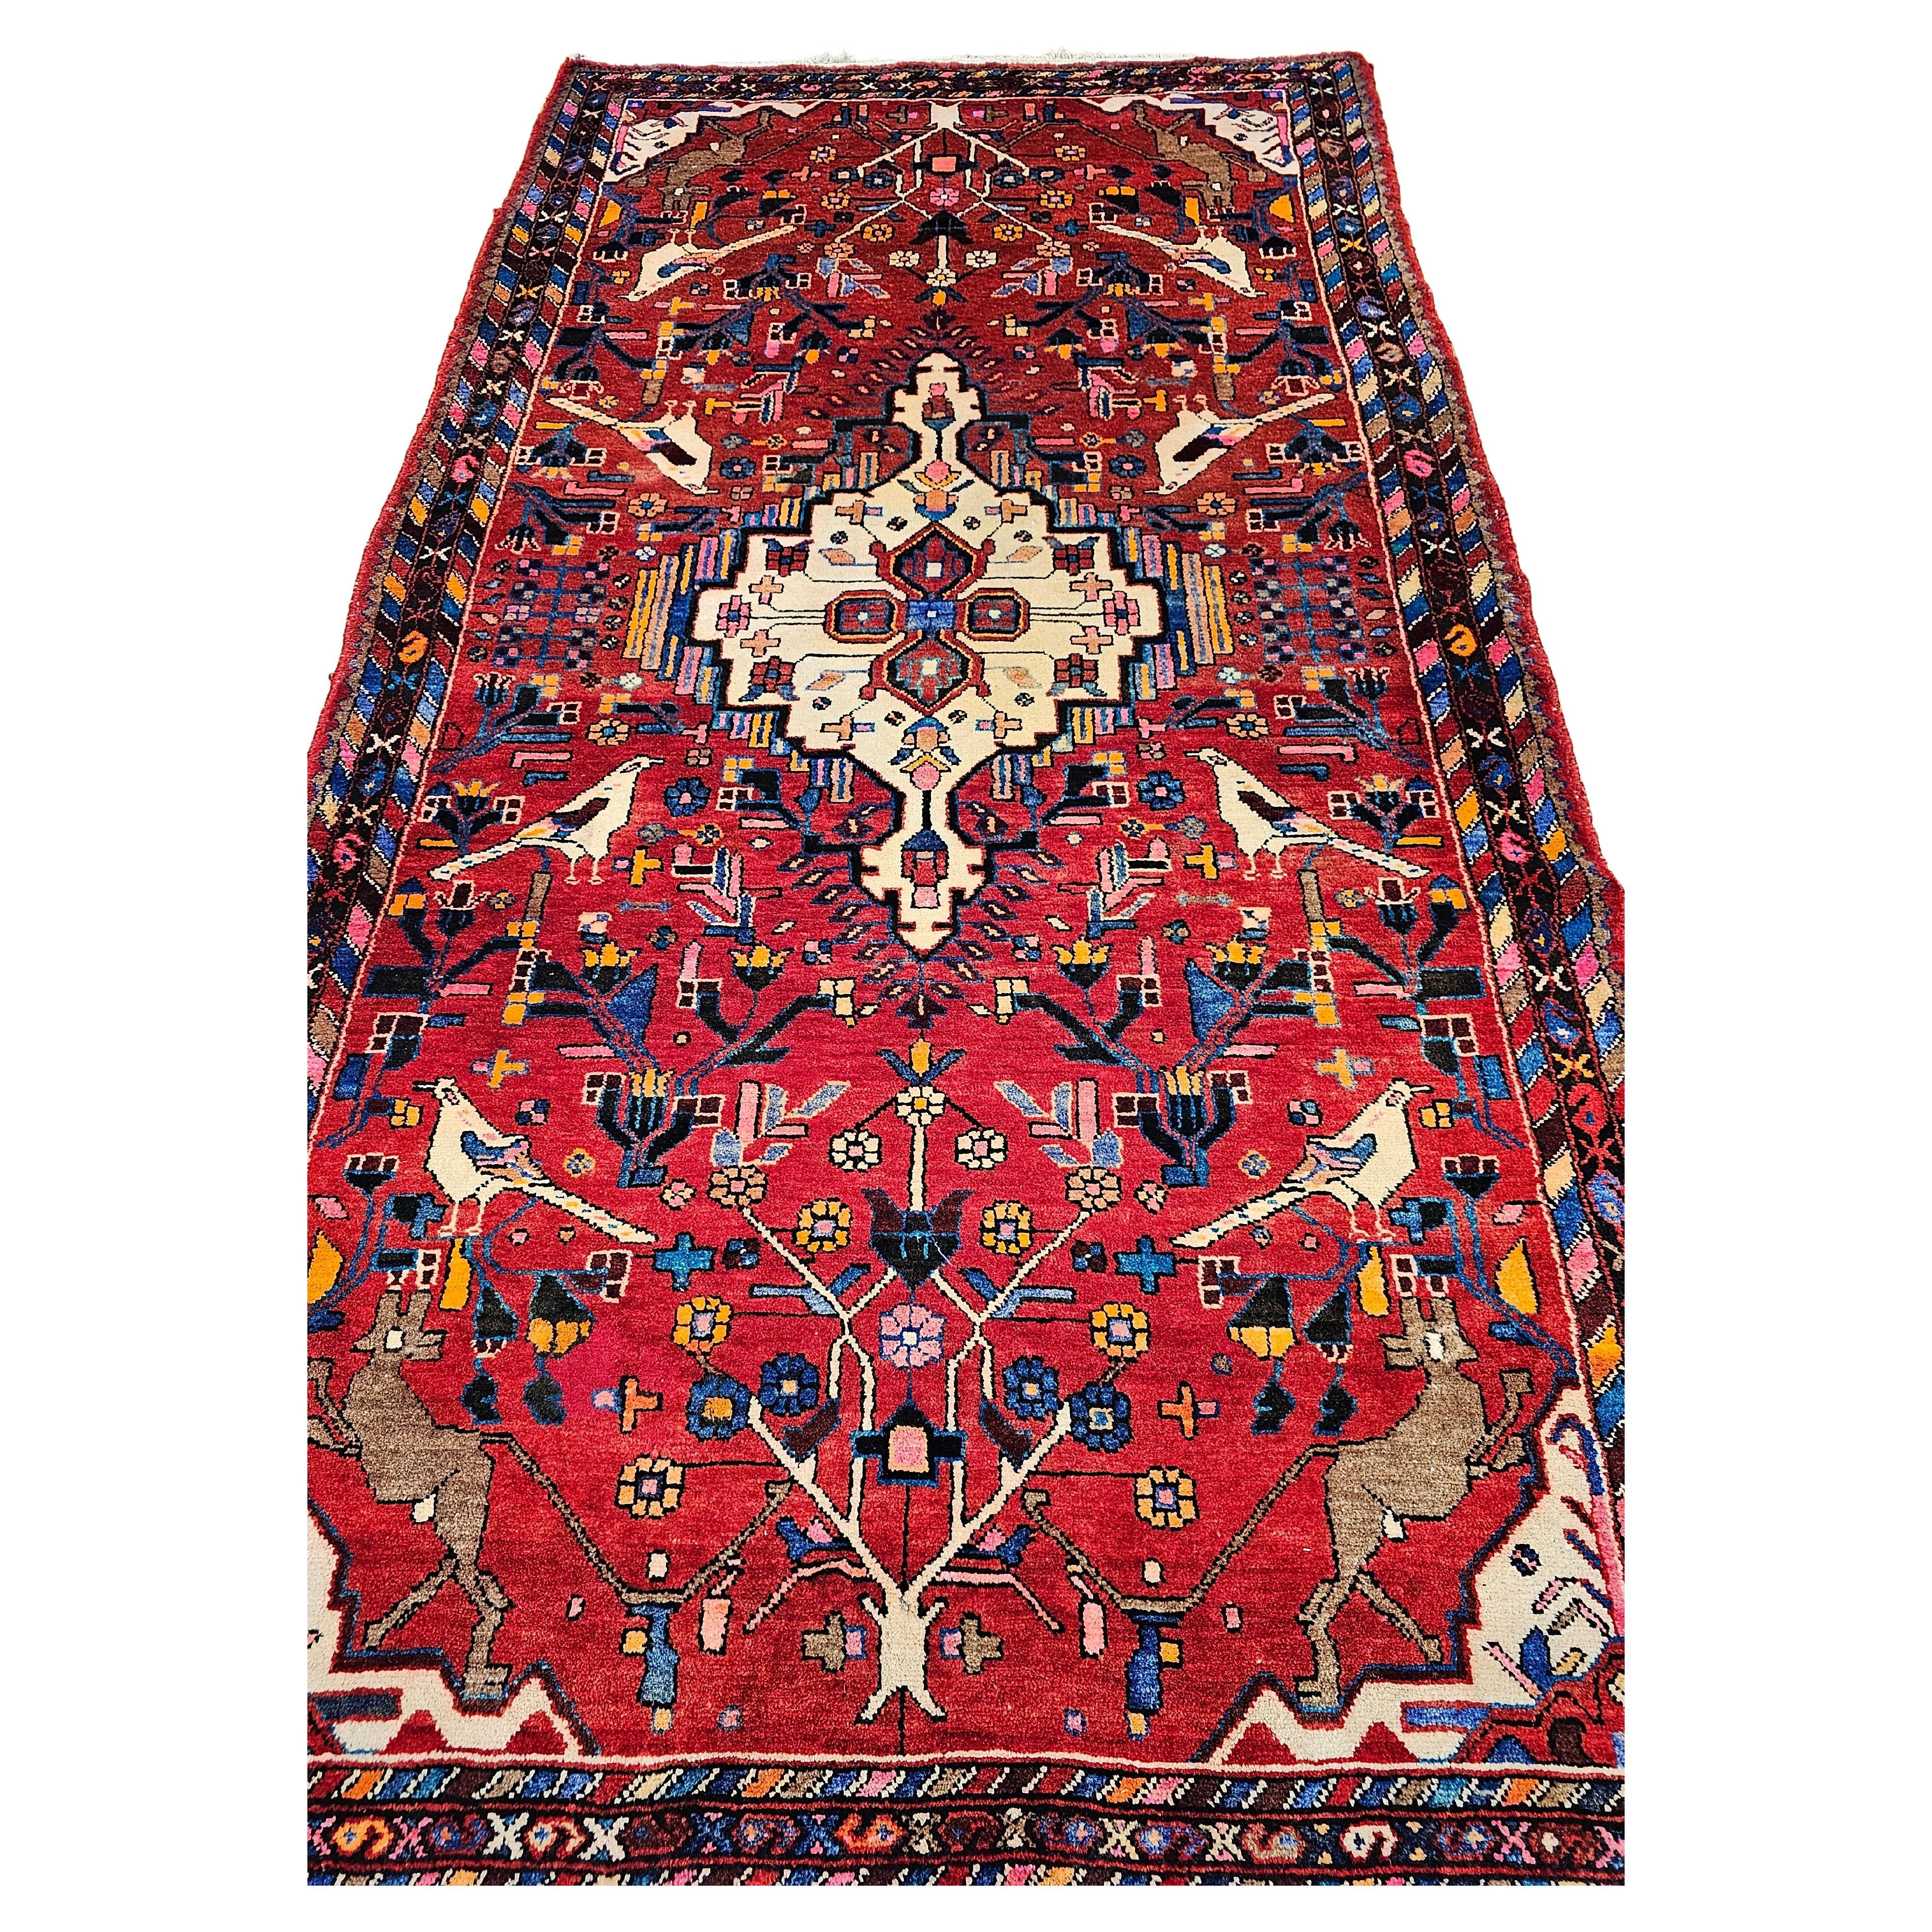 Vintage Persian Hamadan Gallery Rug with Animal Designs in Bright Red Color. There is a very unique and wonderful design of birds throughout the field. There are also designs of dogs in brown color at each end of the rug. The hand-knotted Persian